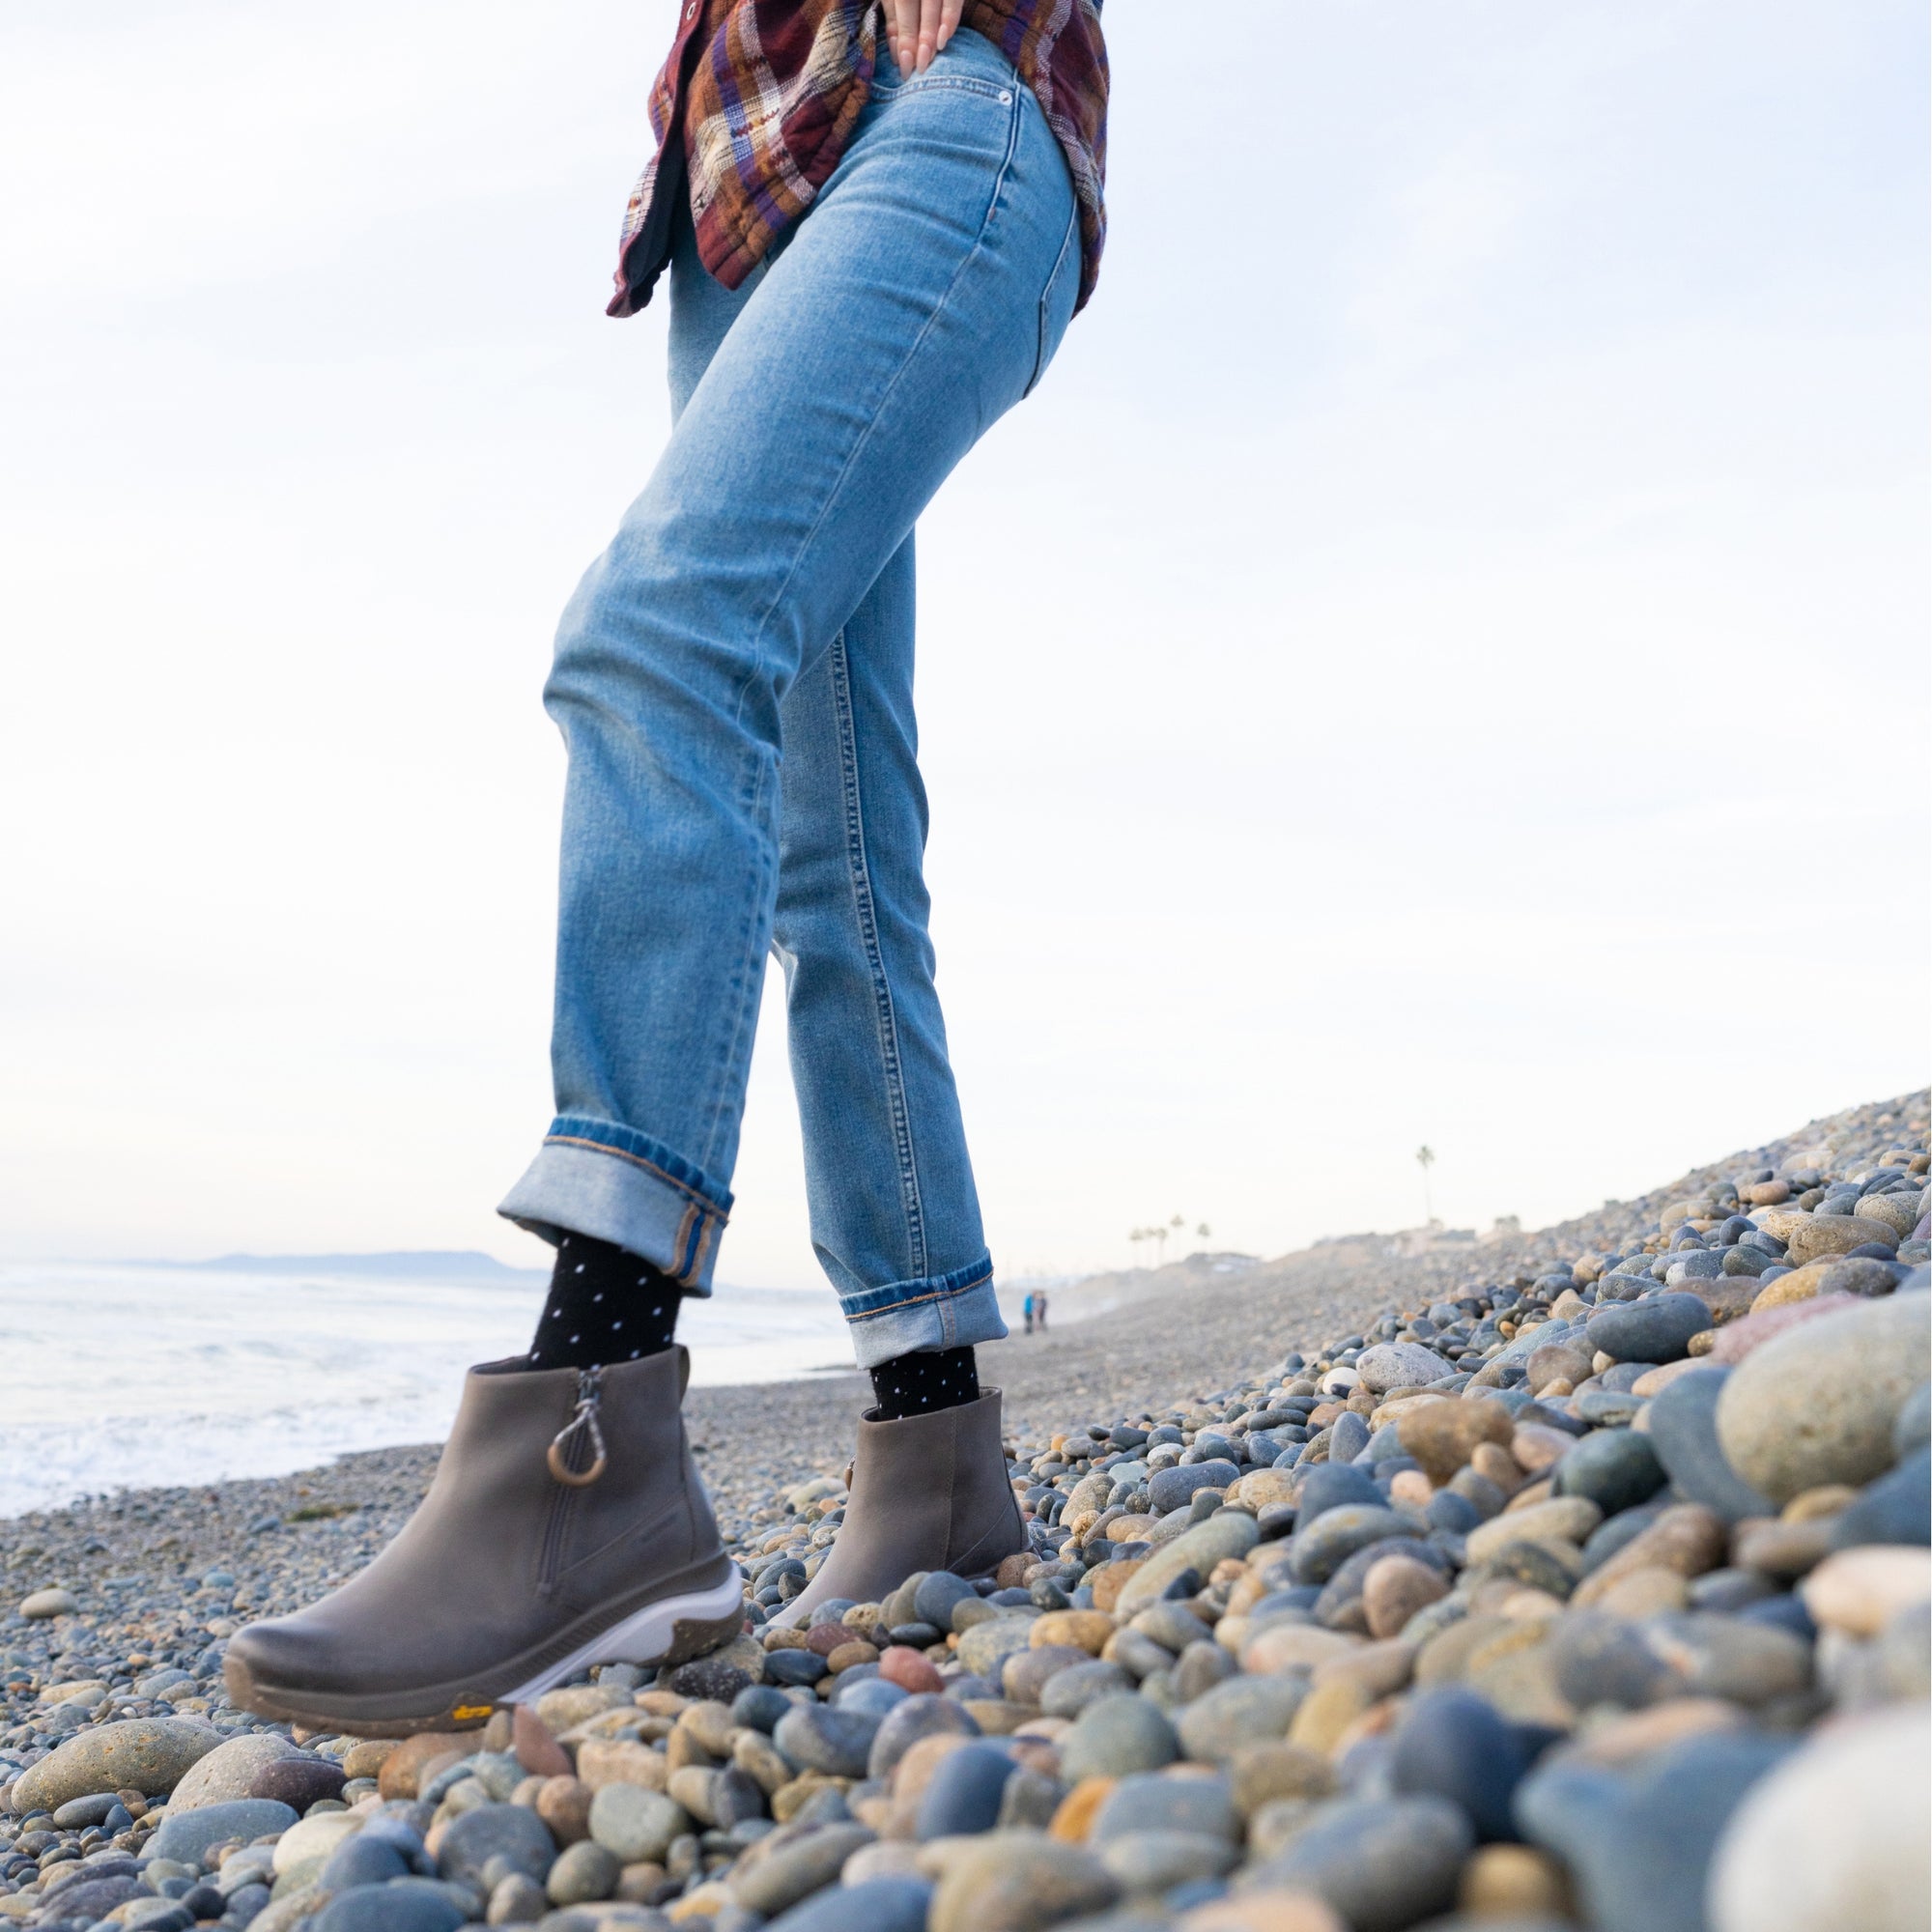 Margo is the perfect bootie for any adventure thanks to a durable Vibram ECOSTEP rubber outsole and high-quality waterproof leathers.